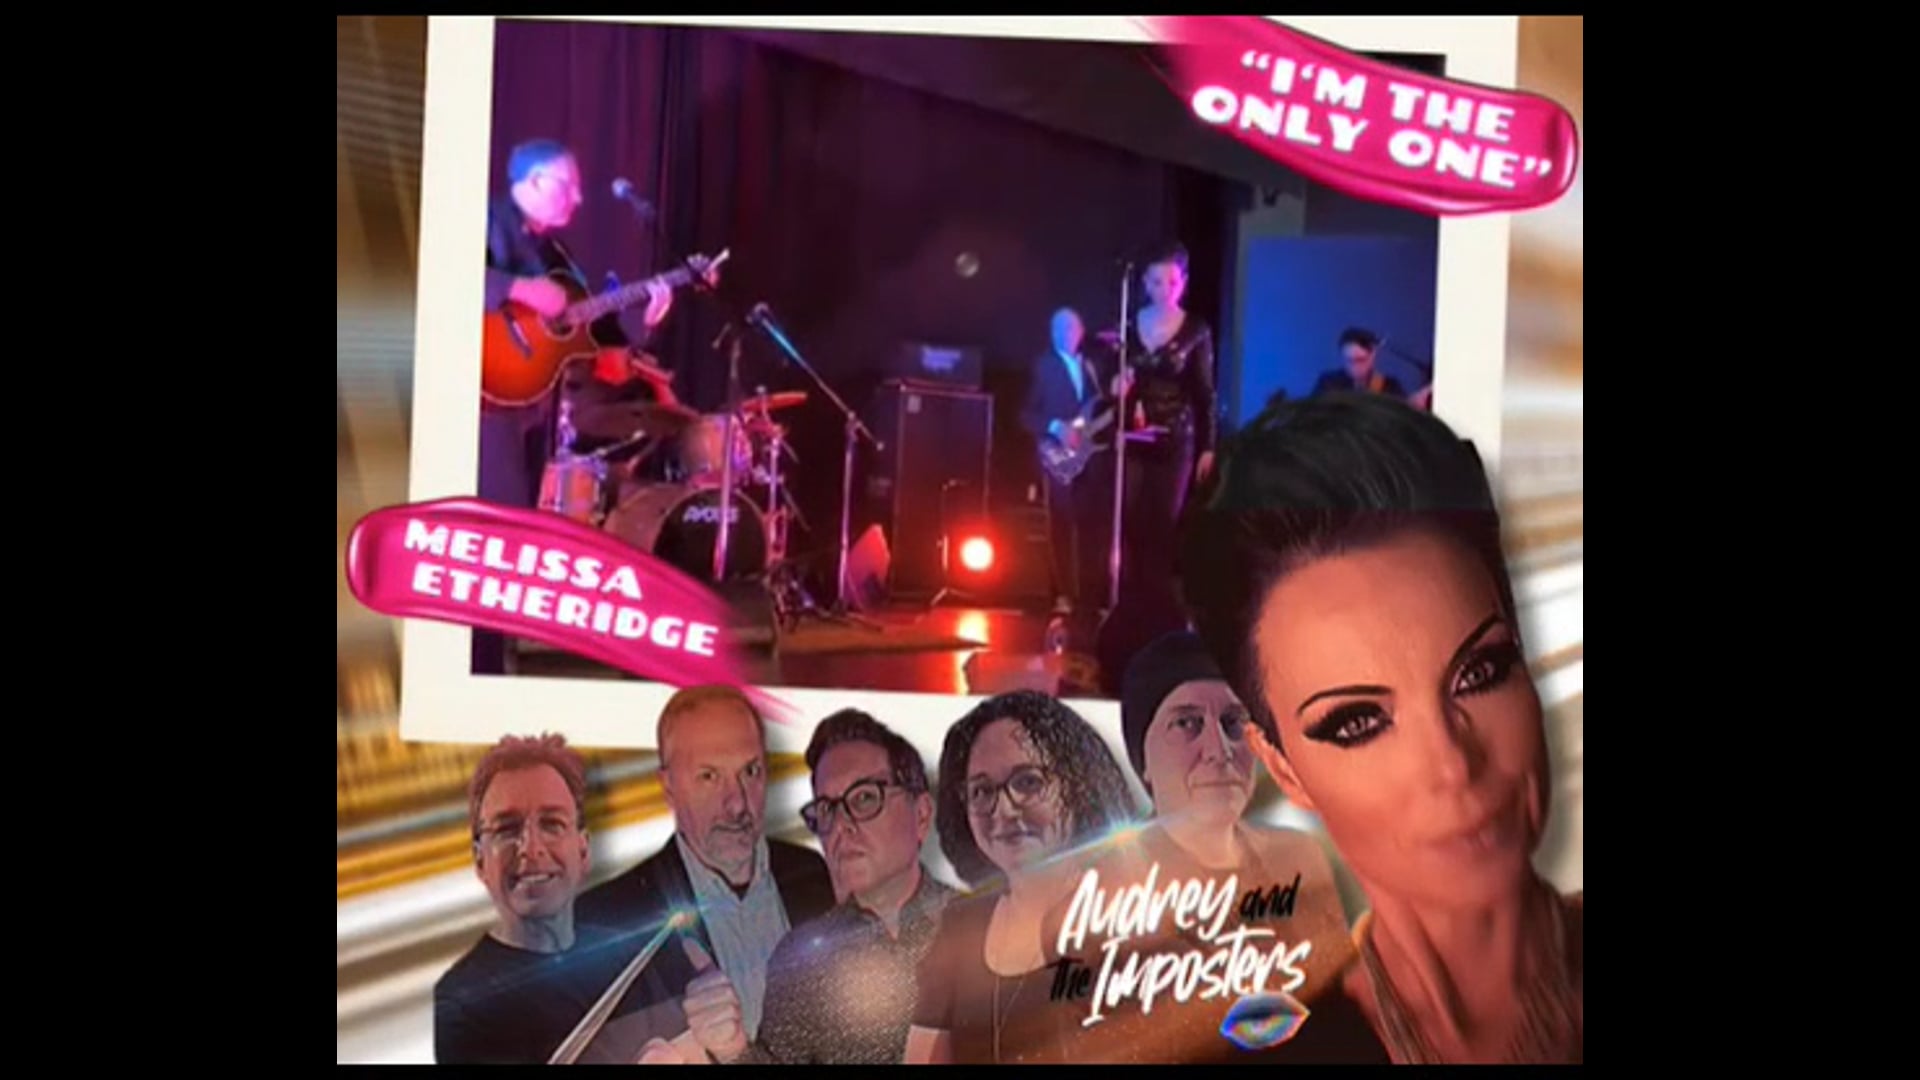 Promotional video thumbnail 1 for Audrey and the Imposters